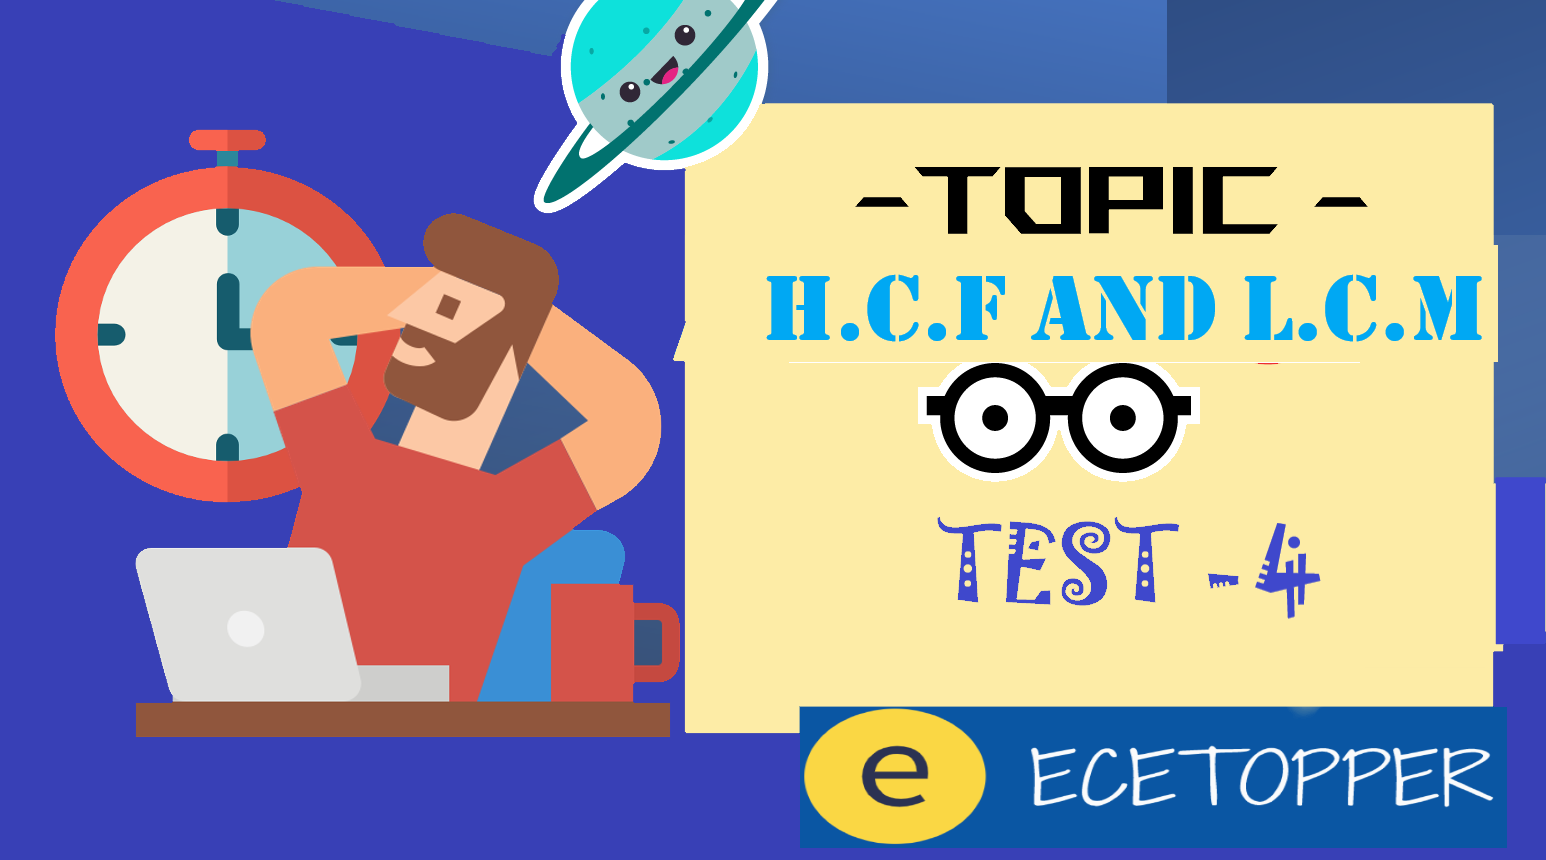 aptitude-mcq-test-with-solutions-and-explanations-topic-h-c-f-and-l-c-m-test-1